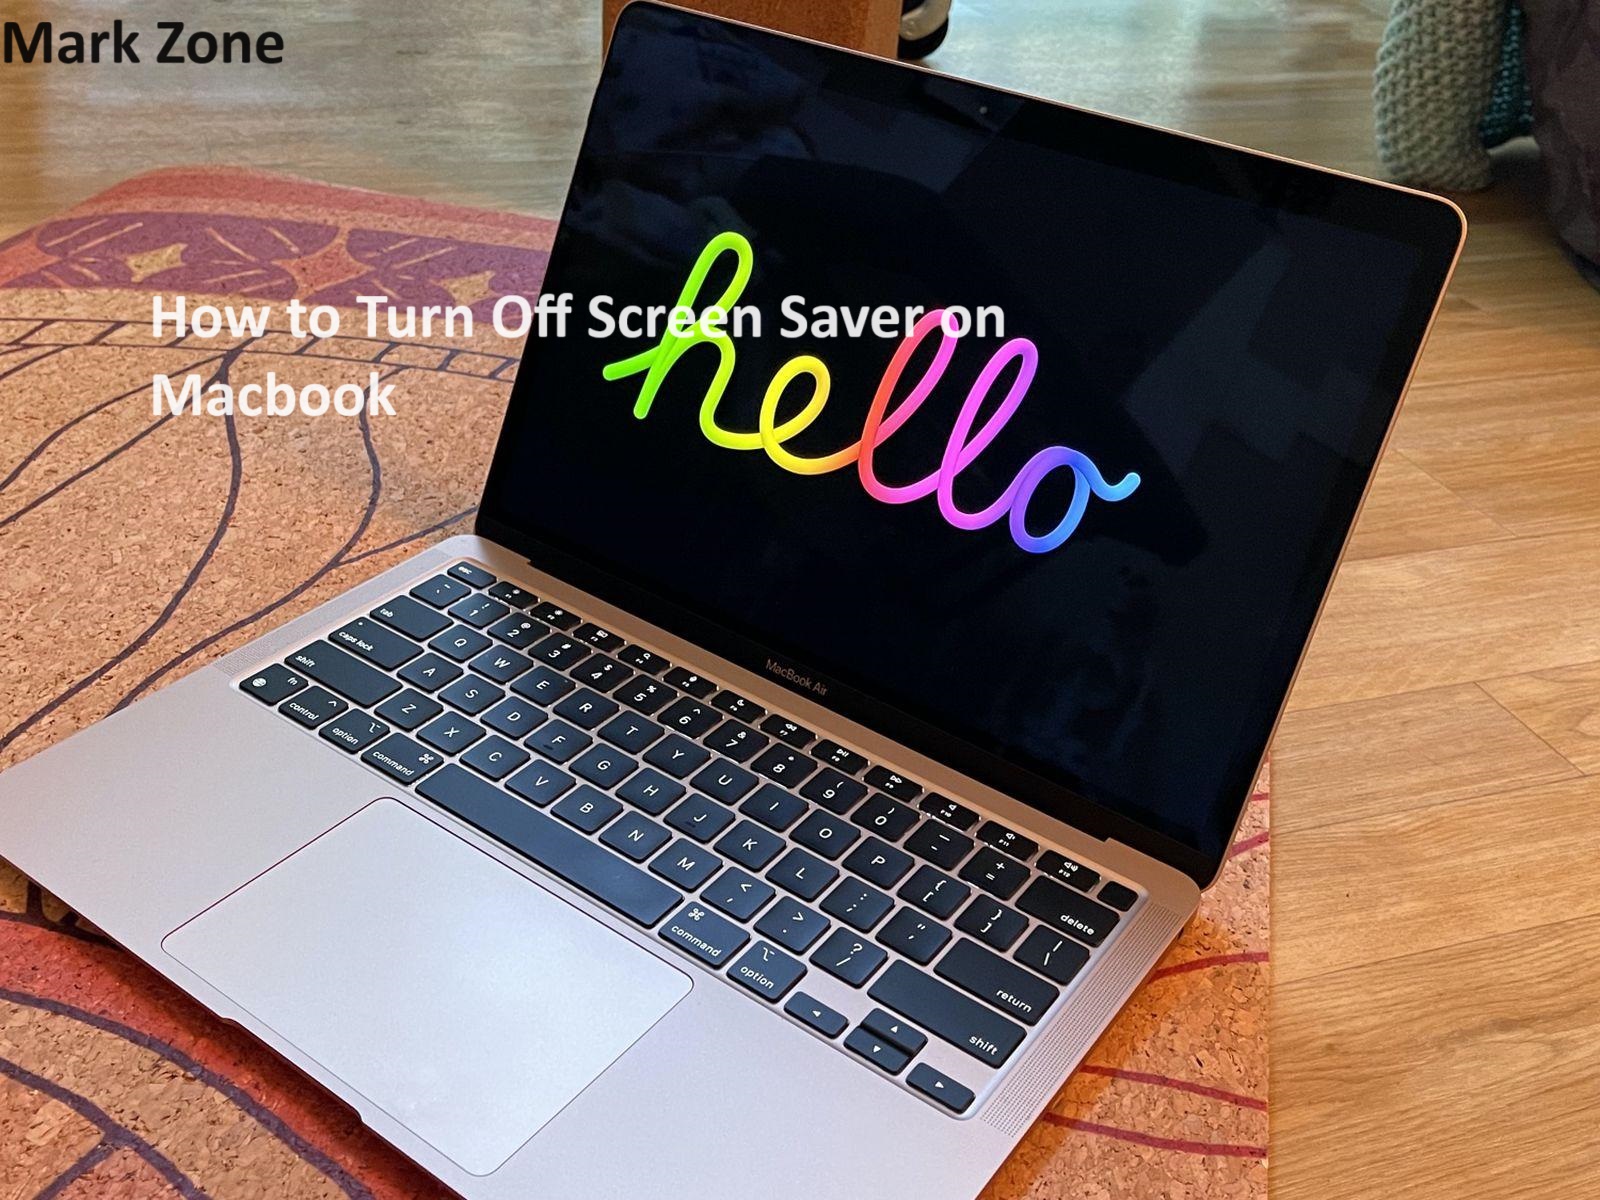 How to Turn Off Screen Saver on Macbook